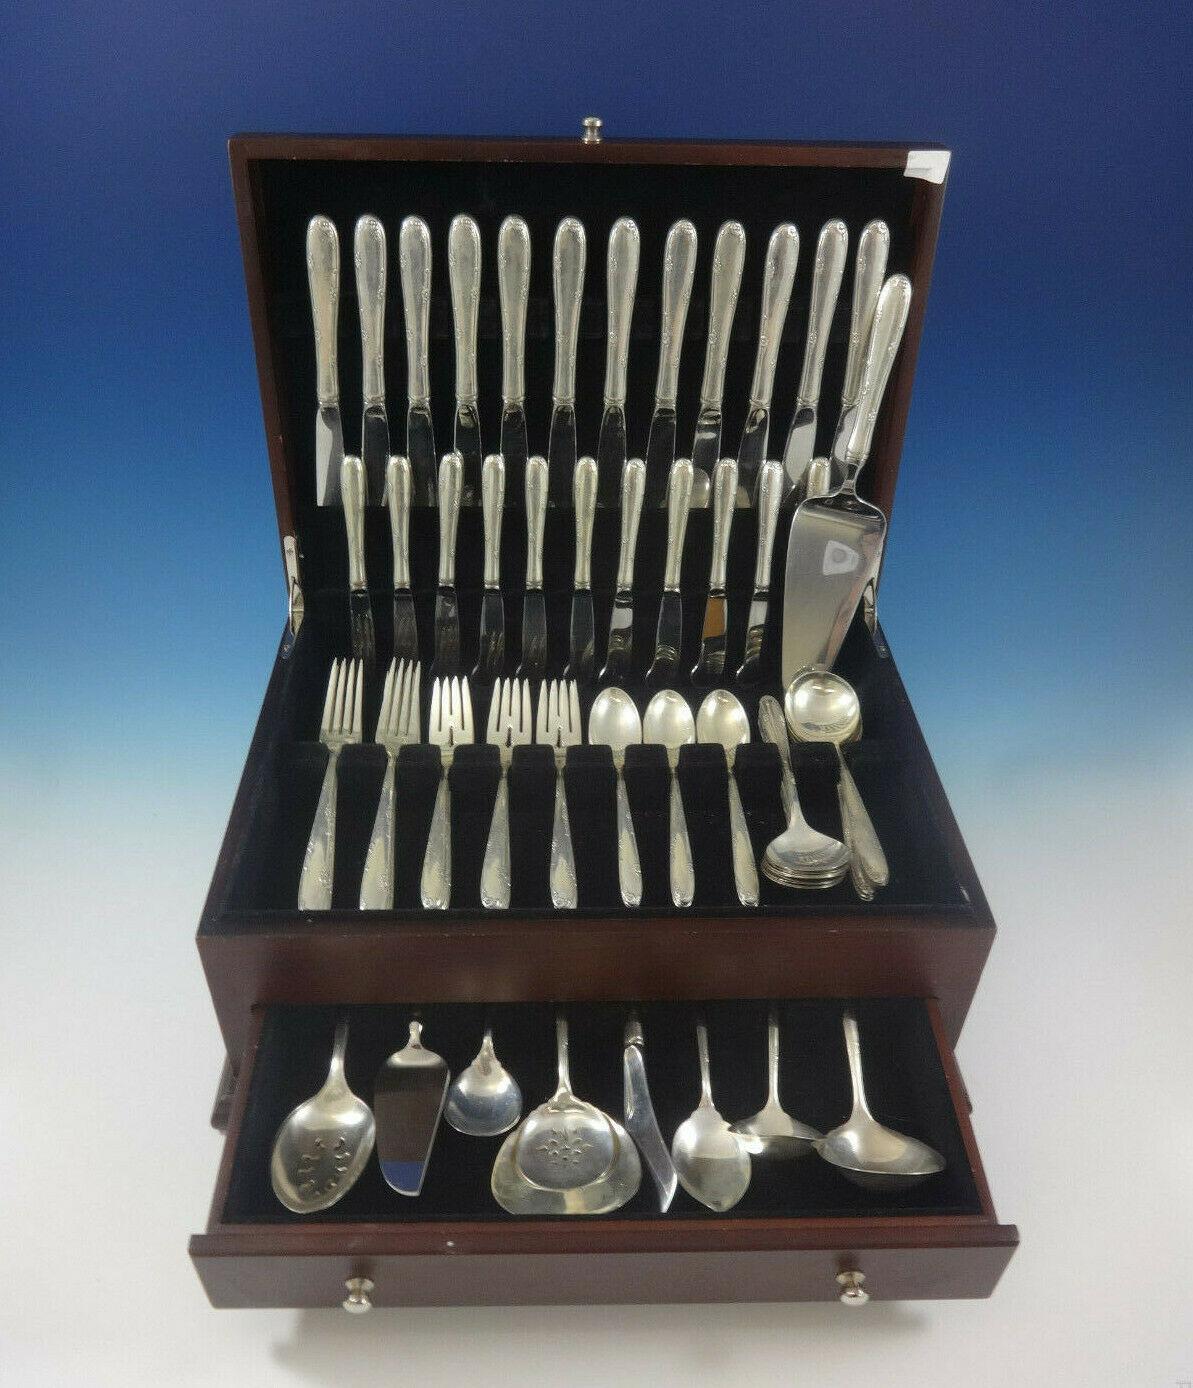 Lovely Madeira by Towle sterling silver flatware set - 83 pieces. This set includes:

12 knives, 9